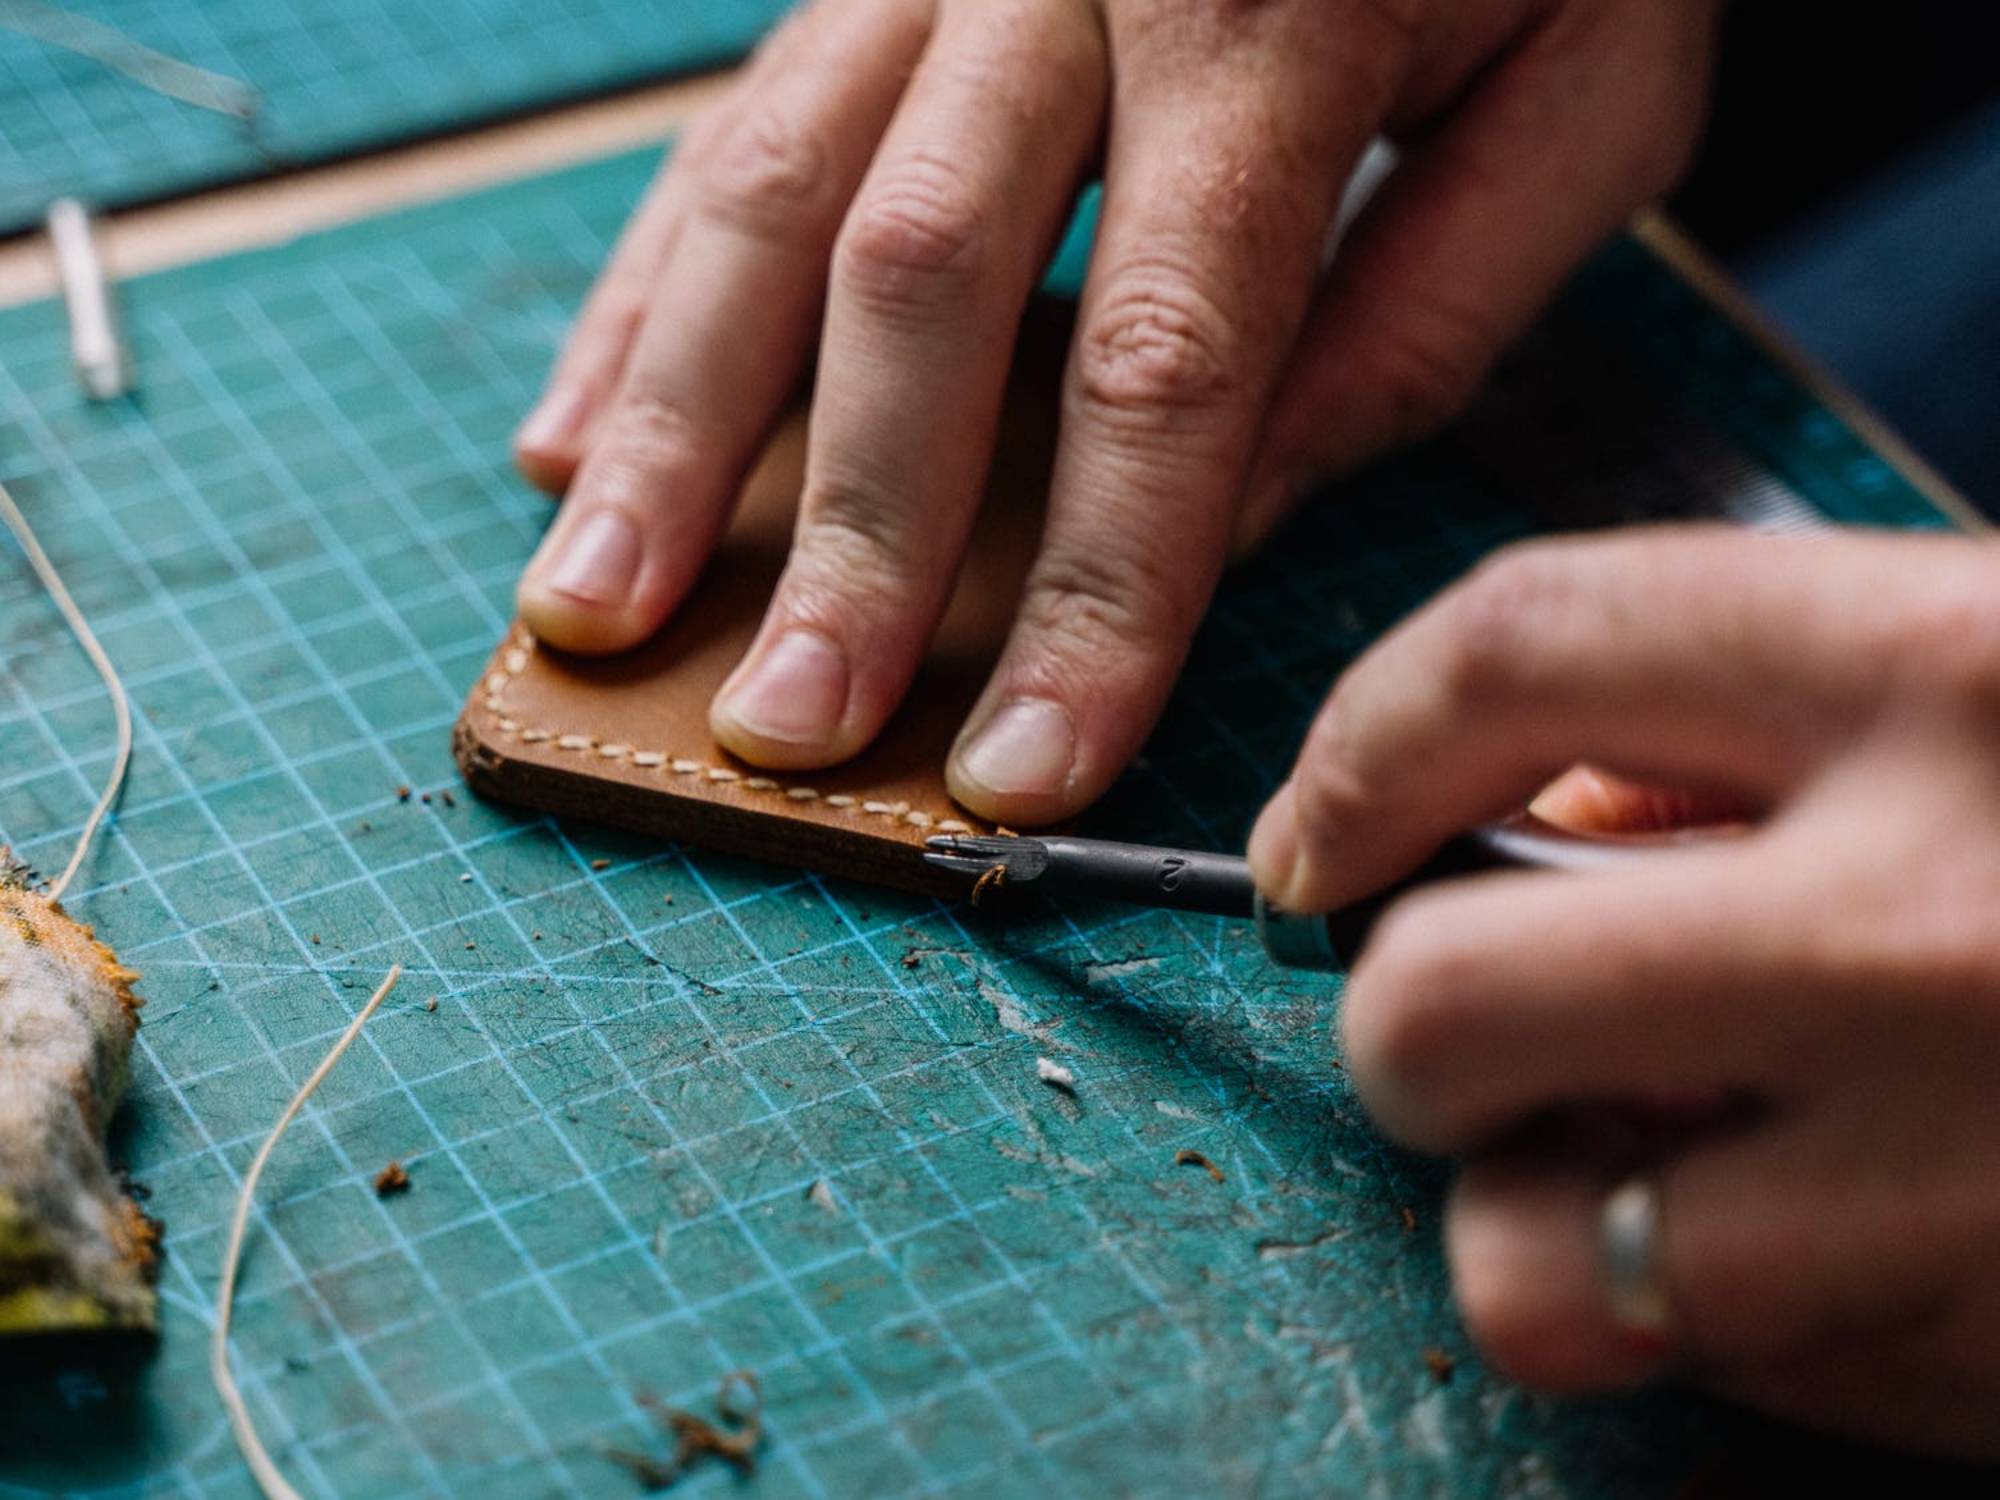 Guide to the Leather Working Tools You Need: Beginner & Pro